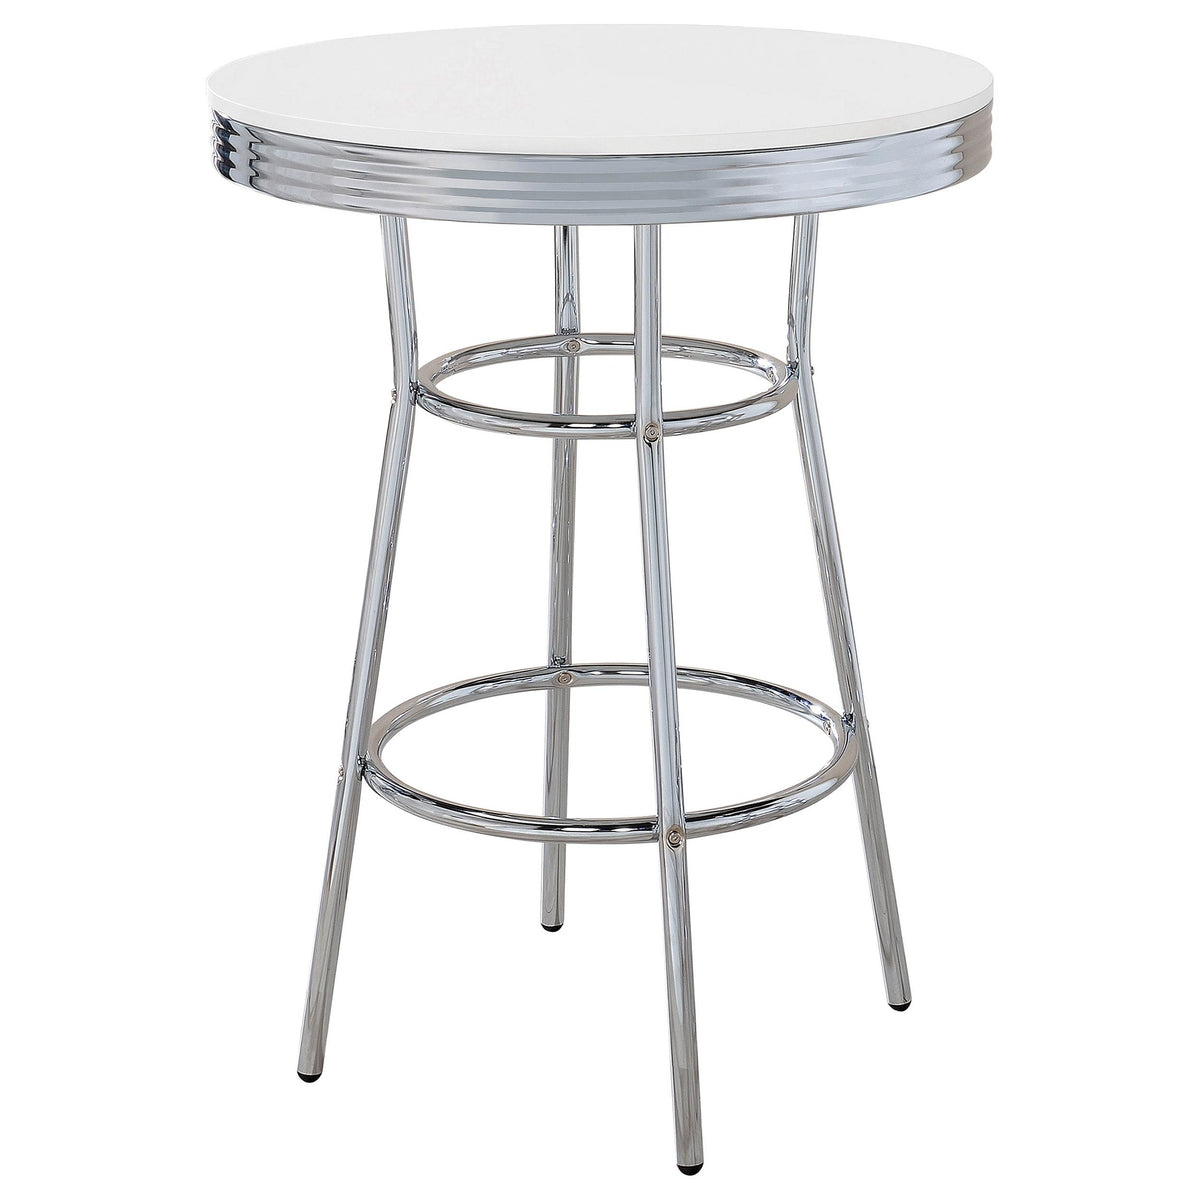 Theodore Round Bar Table Chrome and Glossy White Theodore Round Bar Table Chrome and Glossy White Half Price Furniture